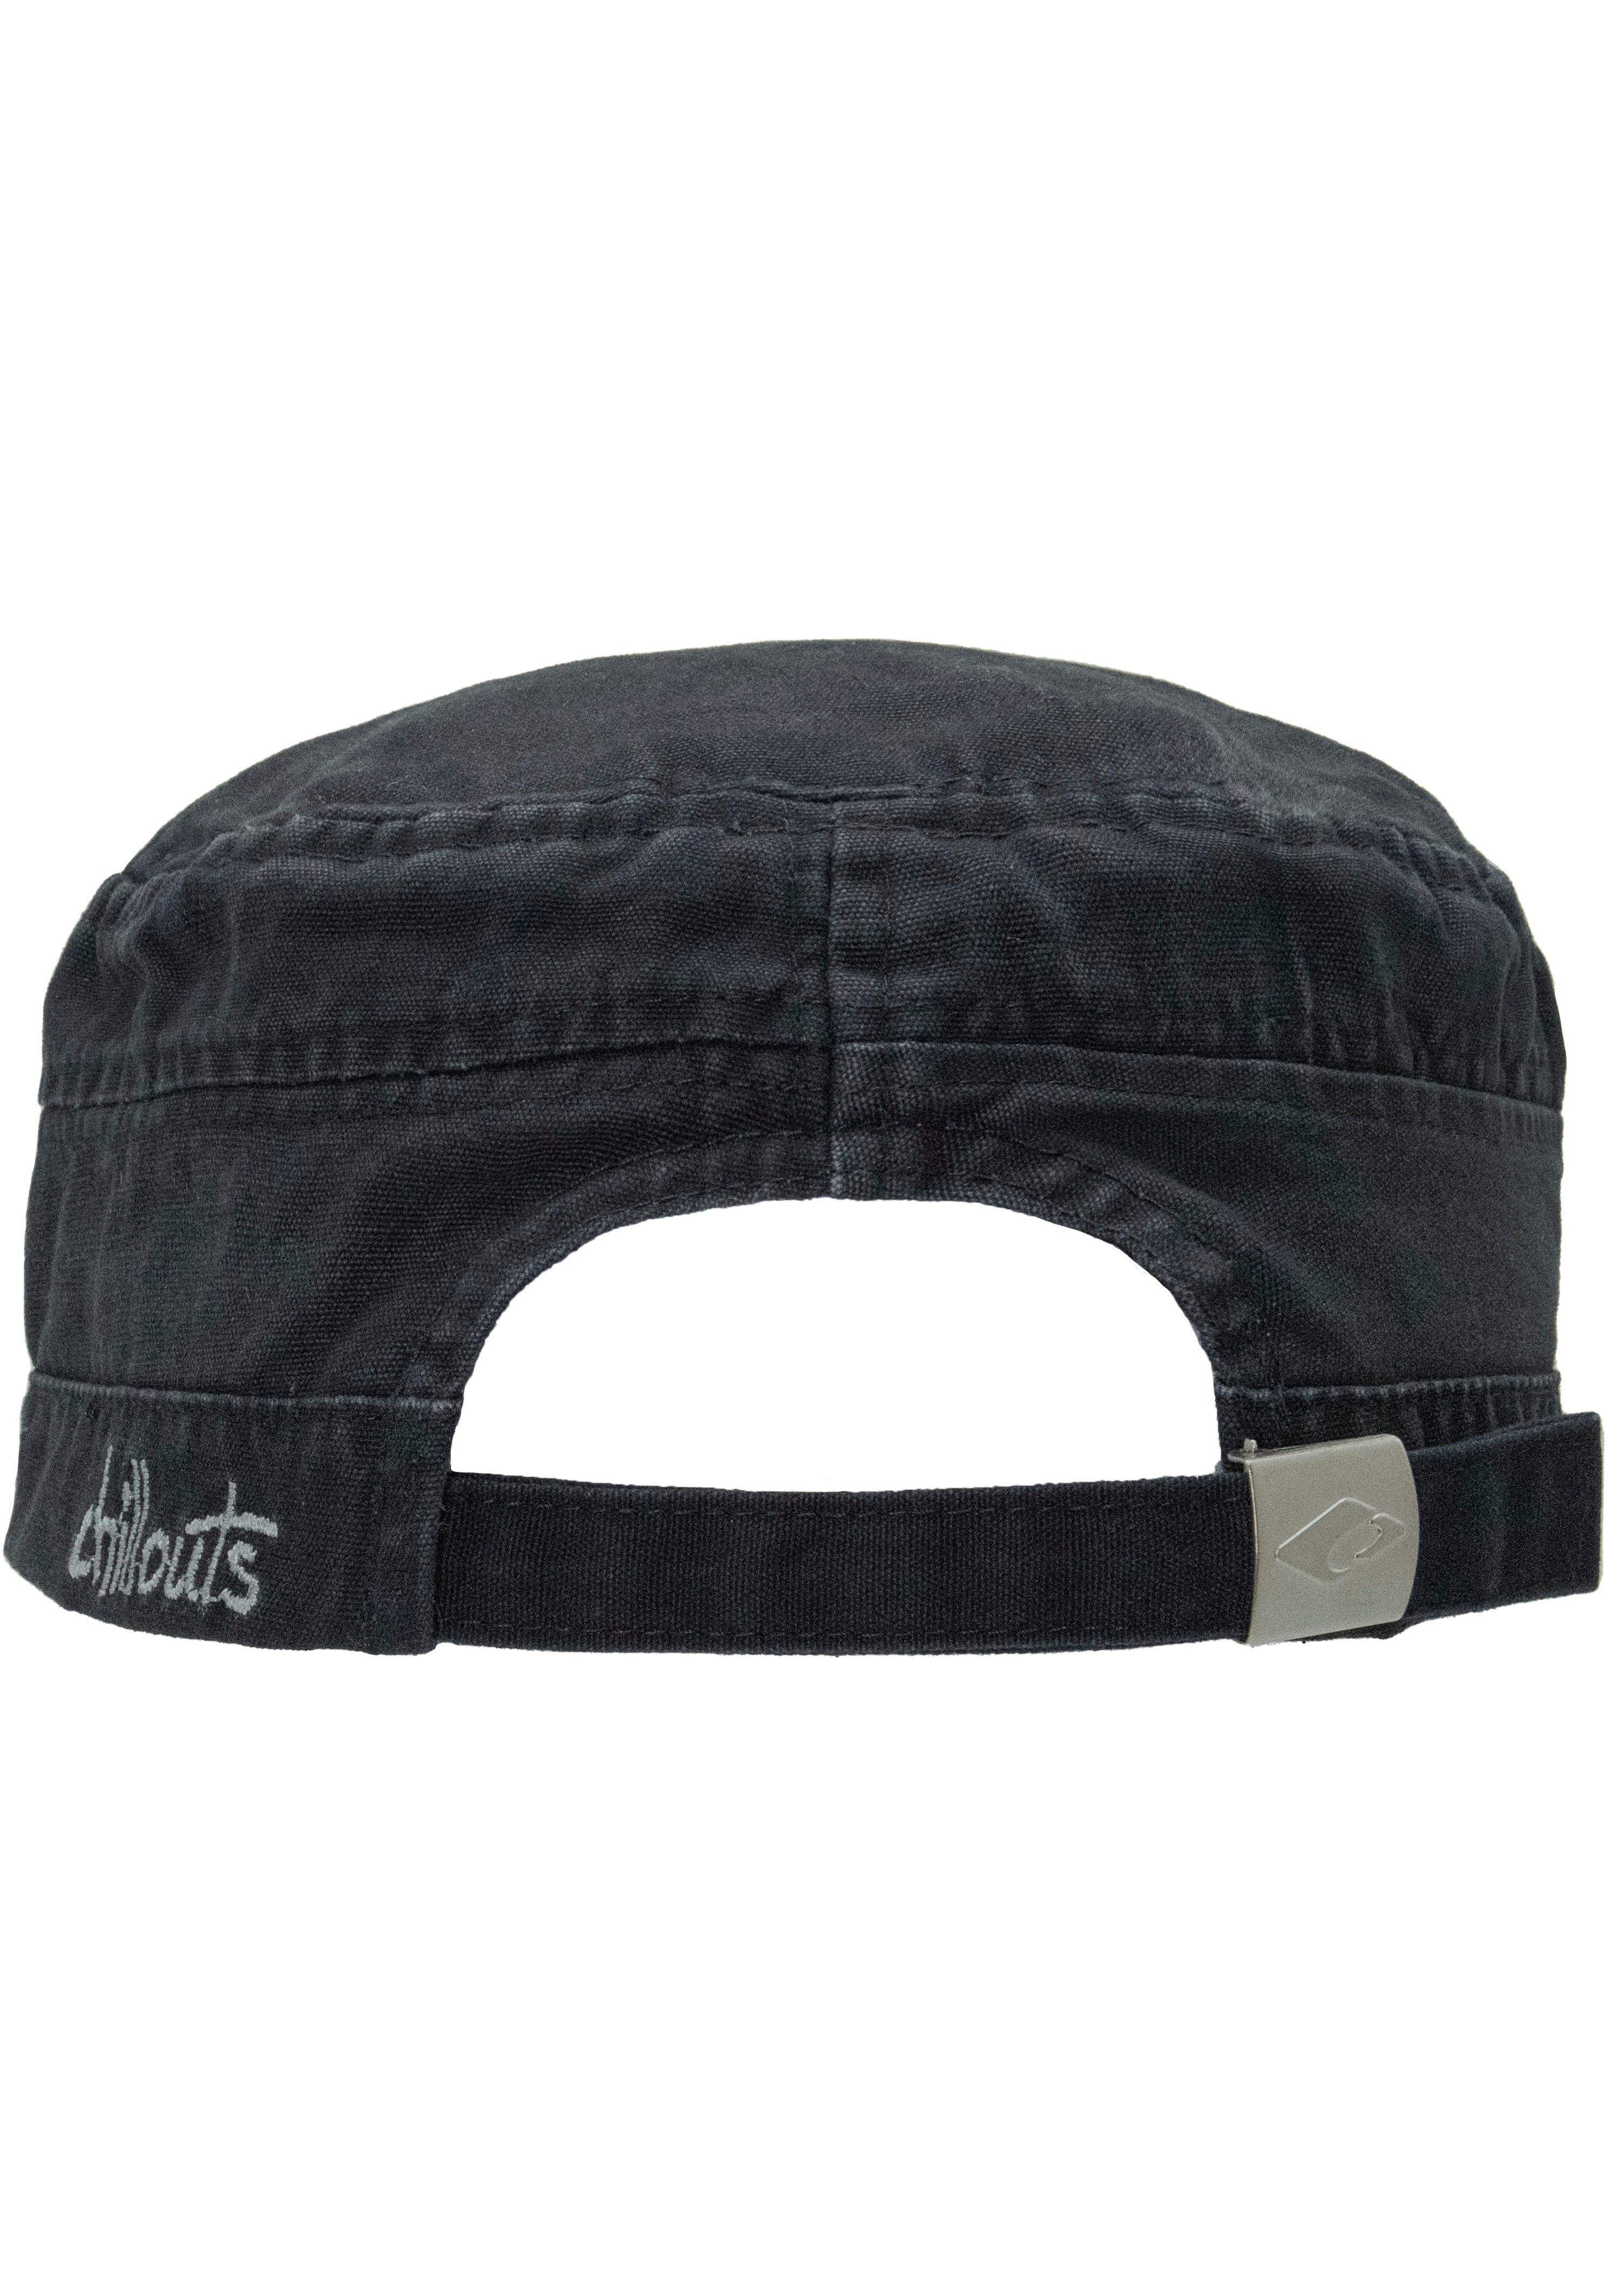 chillouts Army Cap El Paso Size navy Baumwolle, Hat reiner washed aus atmungsaktiv, One